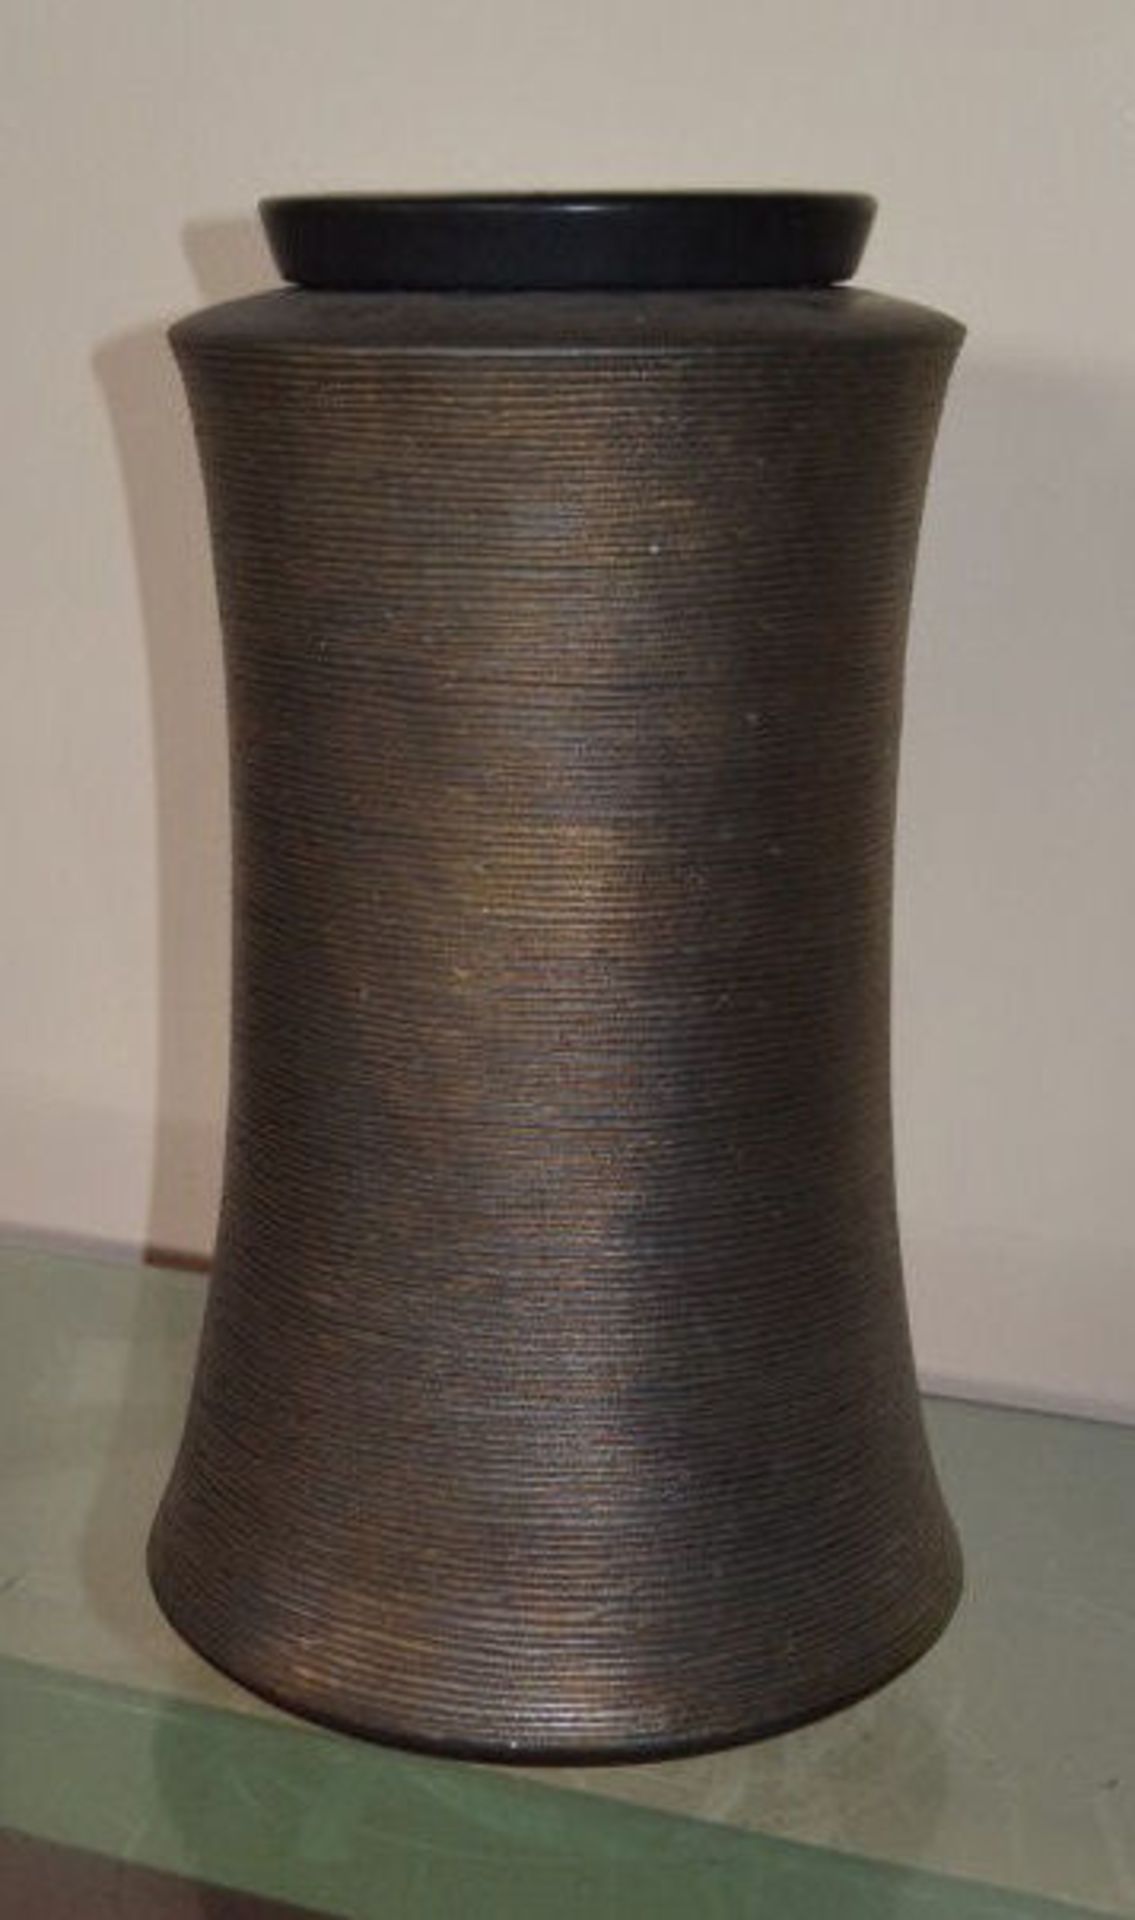 1 x Large Metal Urn In Bronze/Copper Colour. 53cm Tall. 28cm Diameter At Top And 31cm At Bottom. - Image 2 of 4